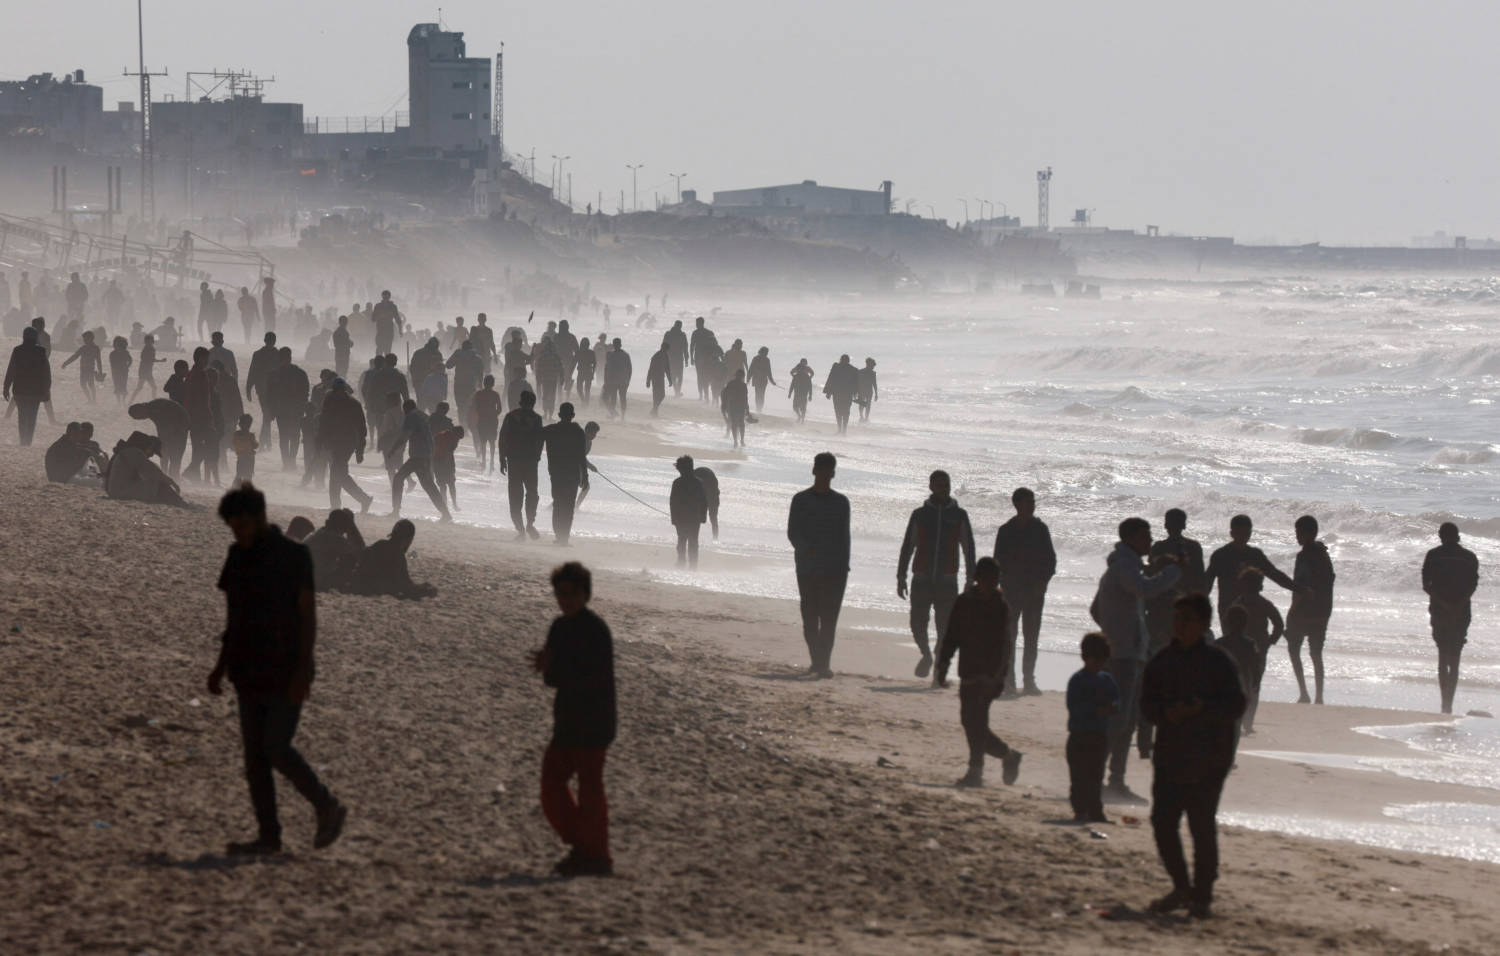 Palestinians Gather On A Beach In The Hope Of Getting Aid Air Dropped, In The Southern Gaza Strip